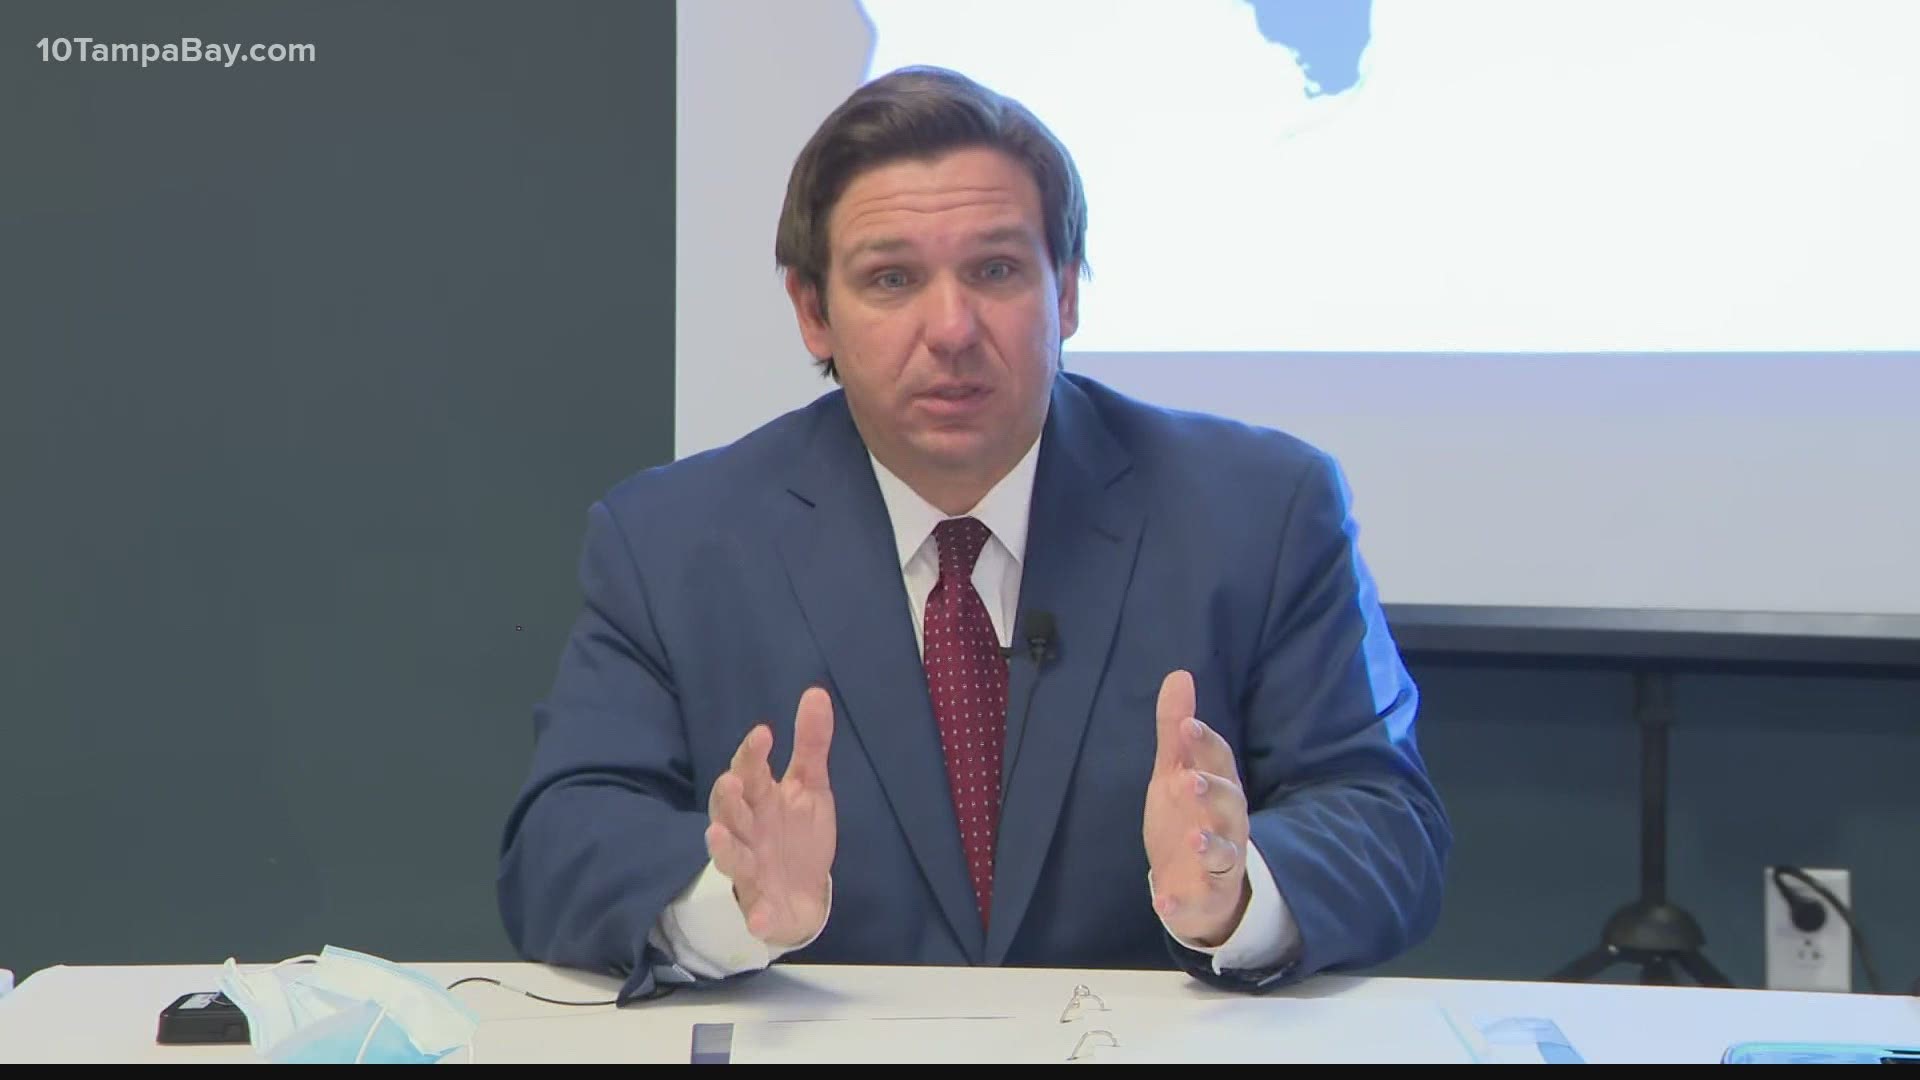 Gov. Ron DeSantis said some hospitals in South Florida are struggling because of a lack of beds, not necessarily a lack of staff.